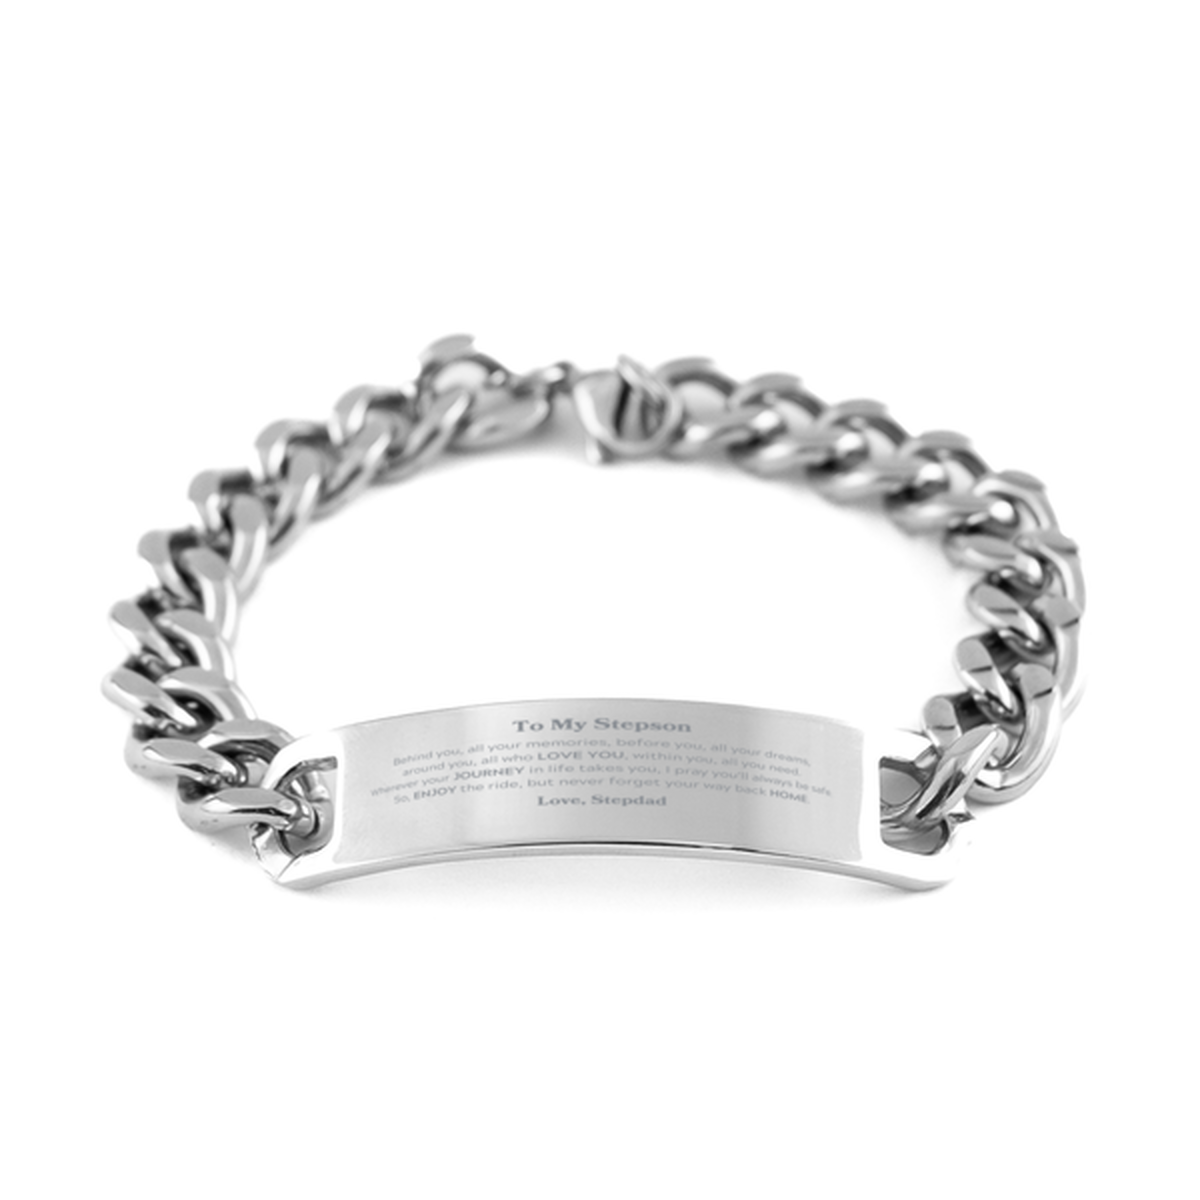 To My Stepson Graduation Gifts from Stepdad, Stepson Cuban Chain Stainless Steel Bracelet Christmas Birthday Gifts for Stepson Behind you, all your memories, before you, all your dreams. Love, Stepdad